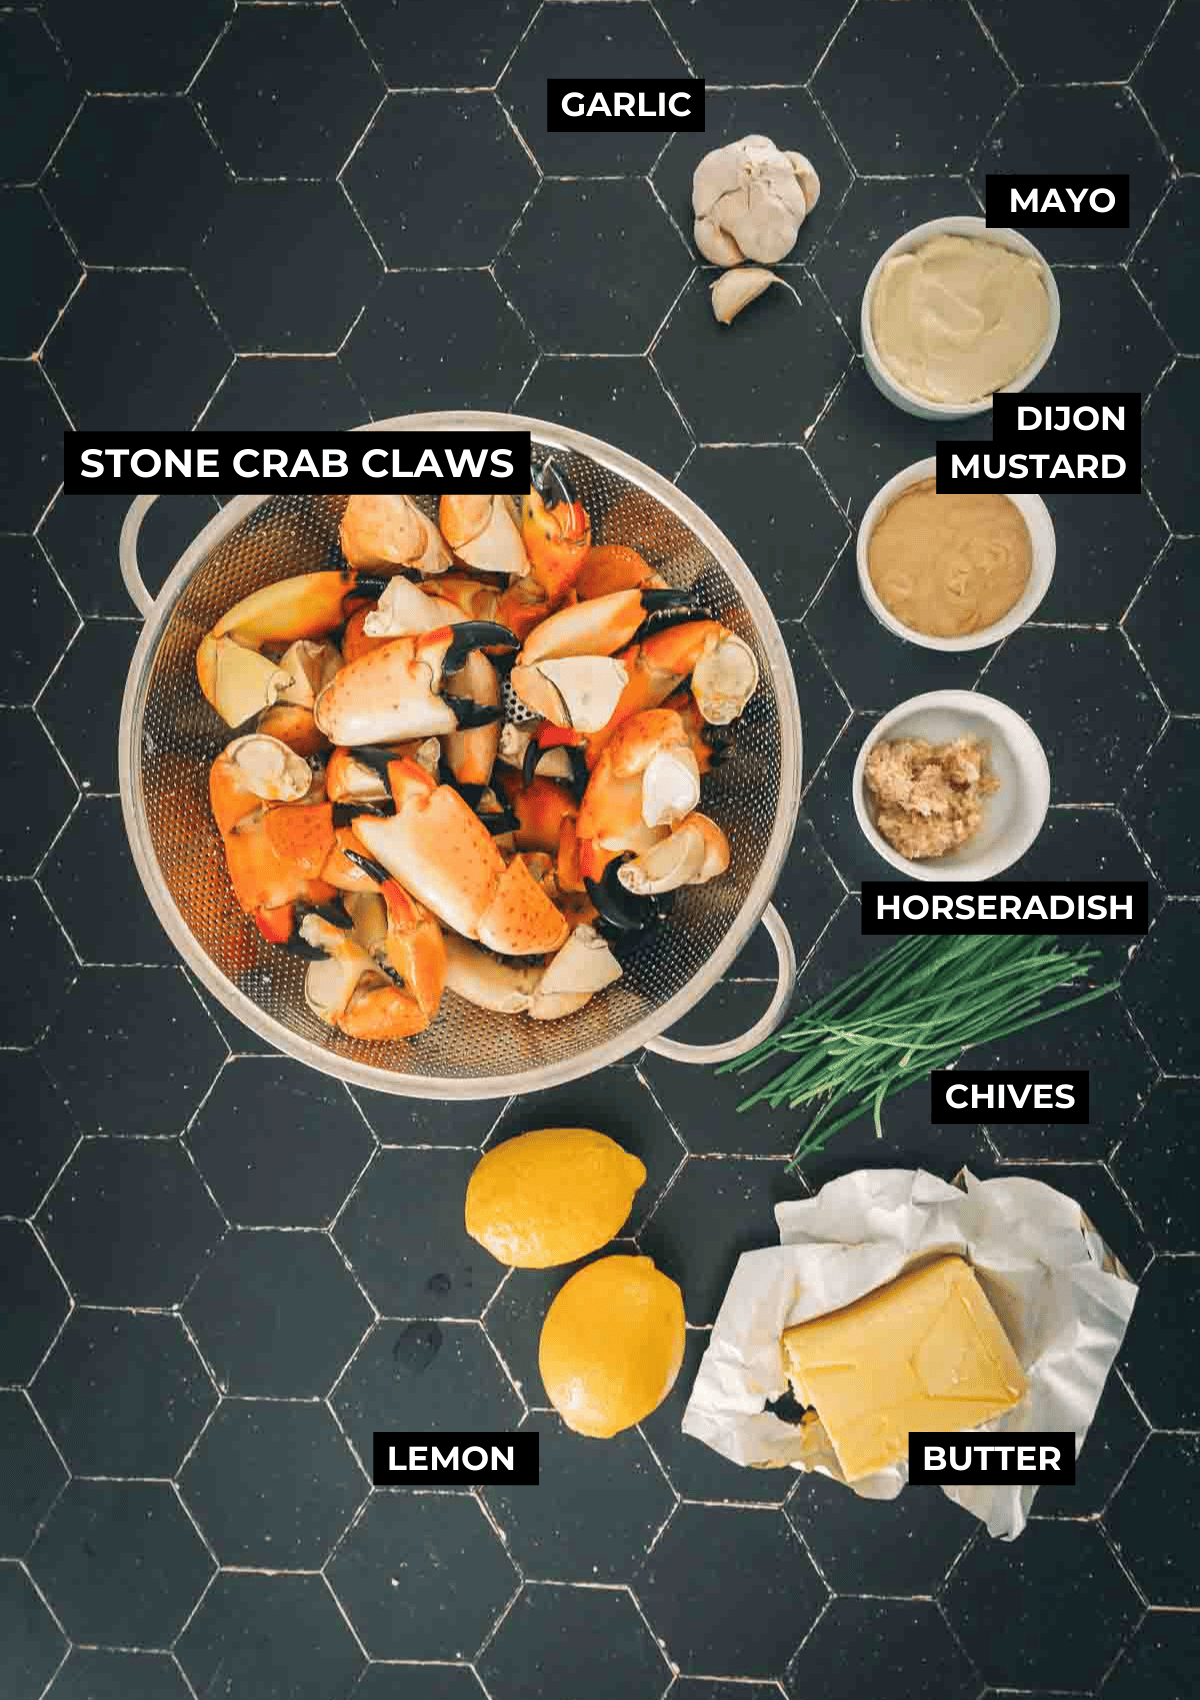 Ingredients for this recipe.